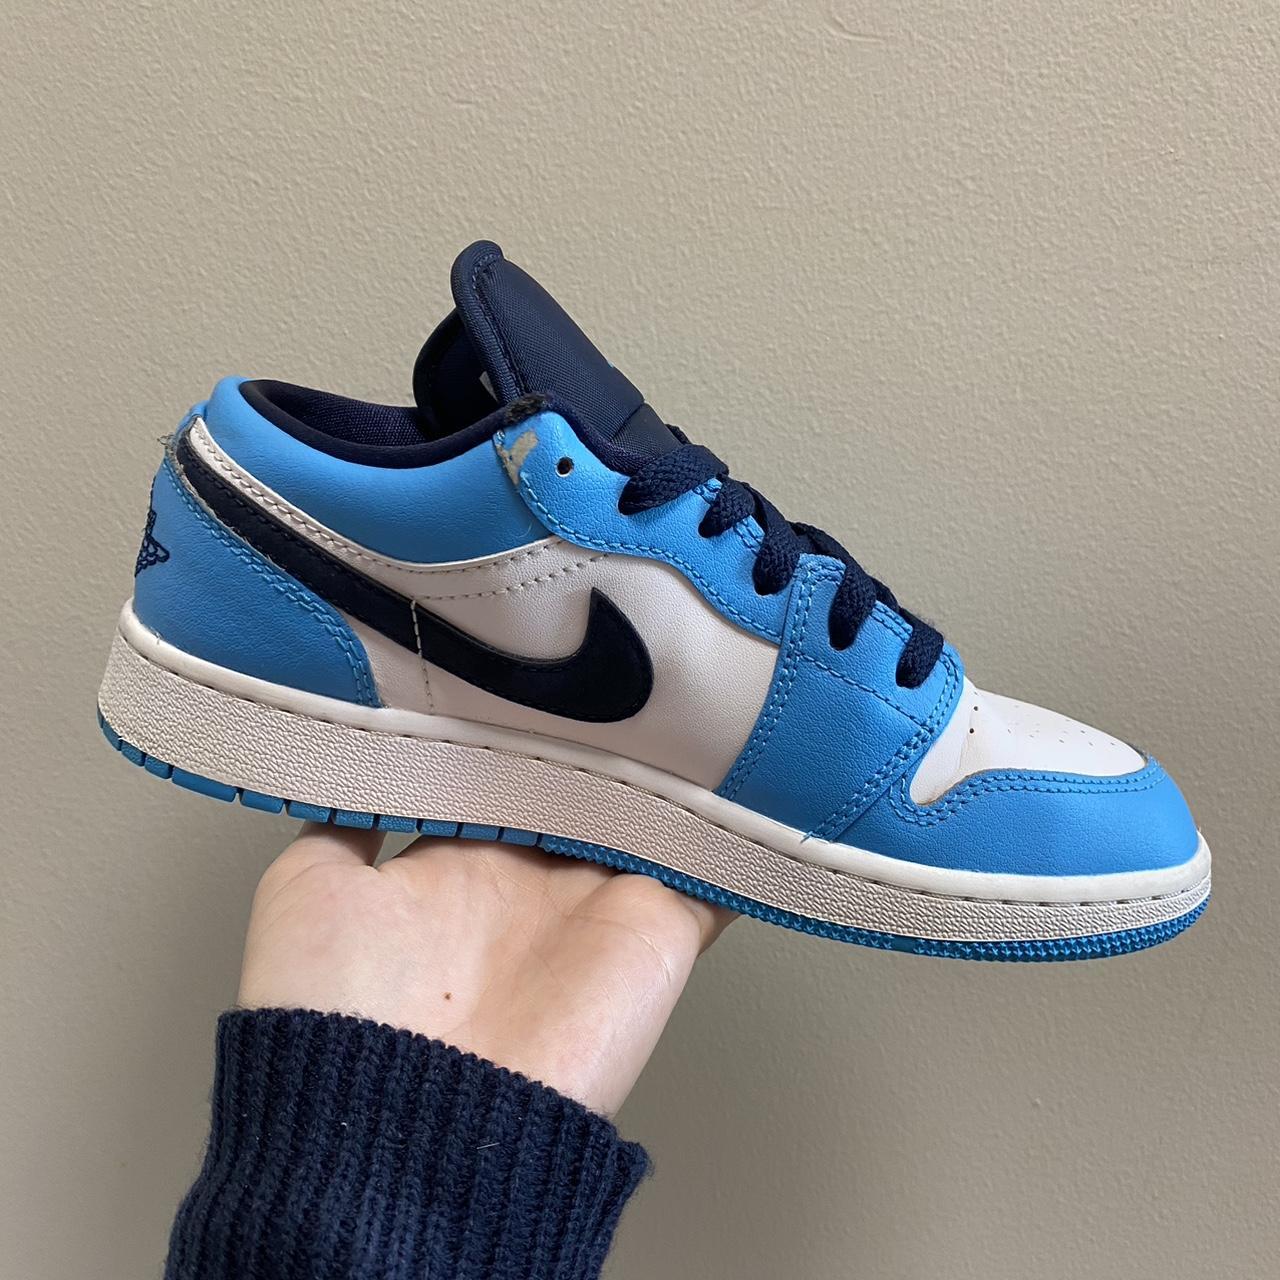 Nike Women's Blue and White Trainers (4)